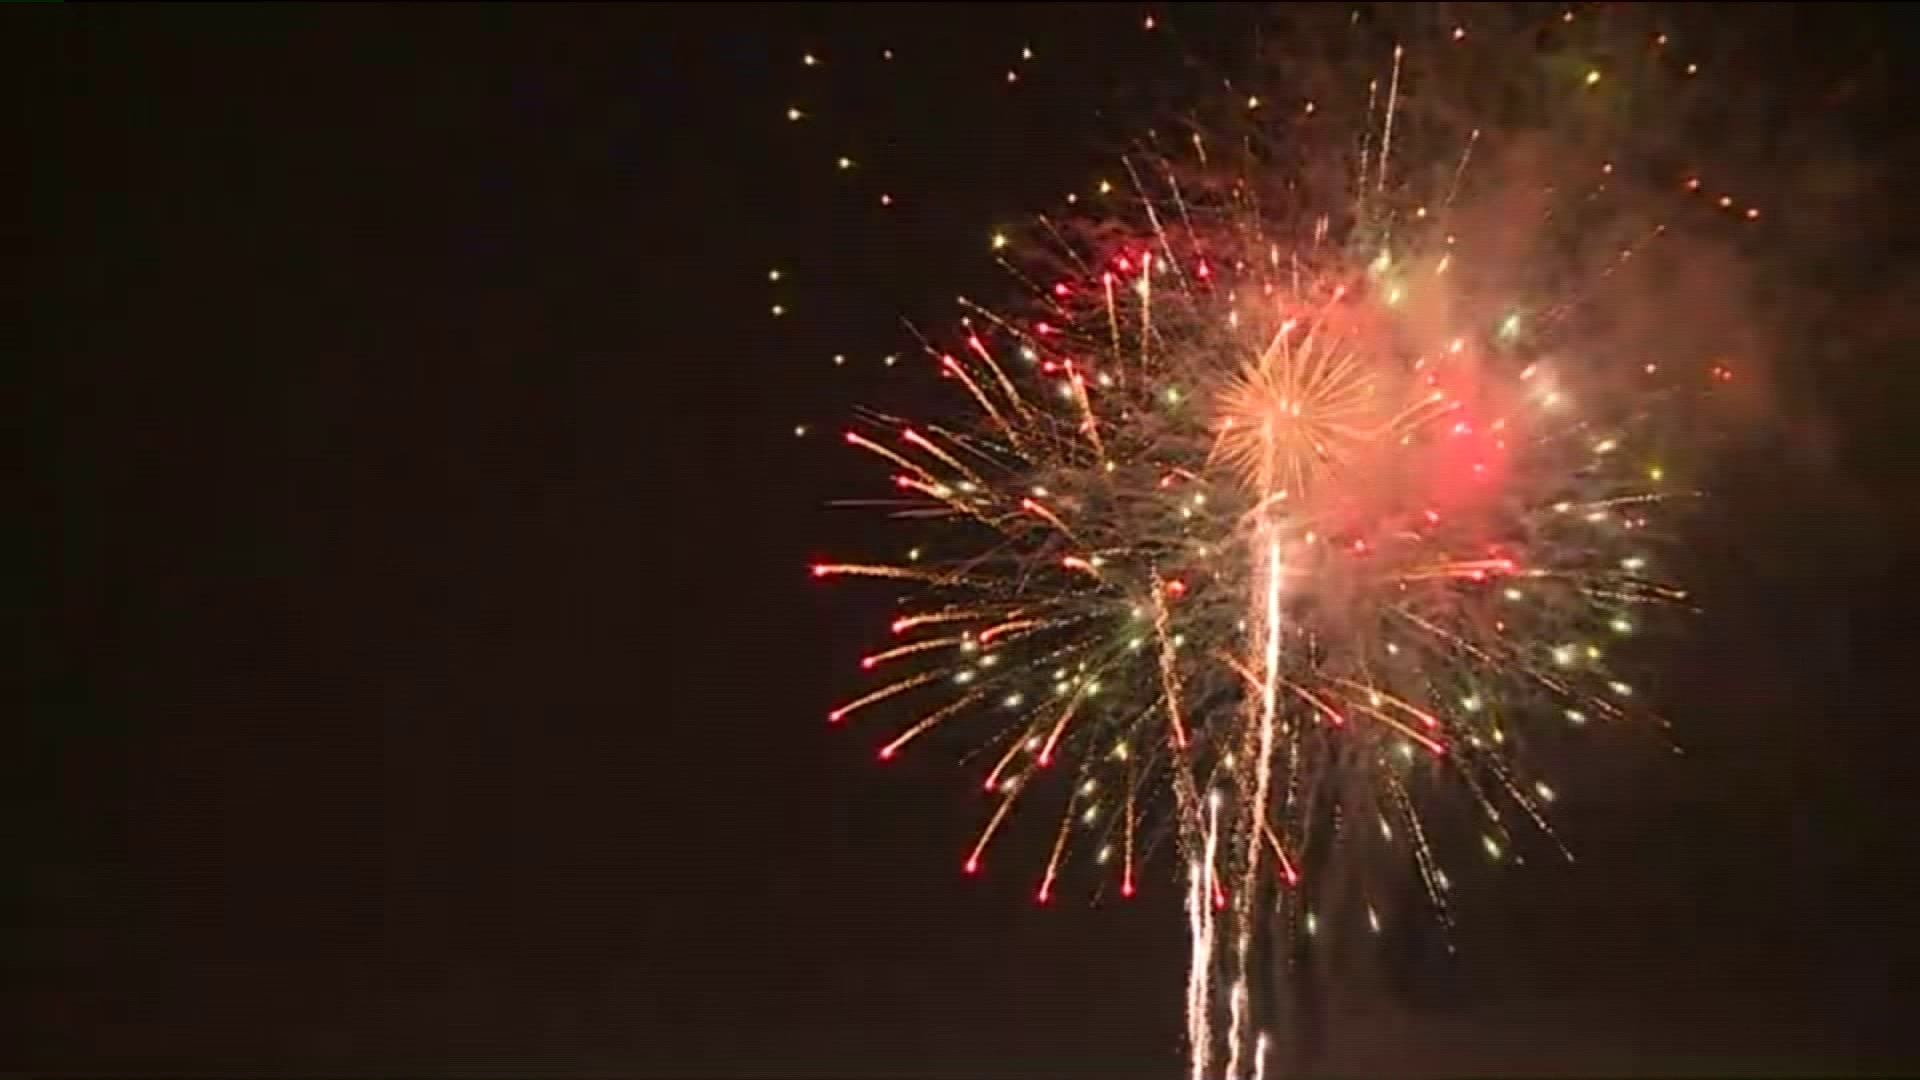 There will likely be 35% fewer fireworks this Fourth of July than last year